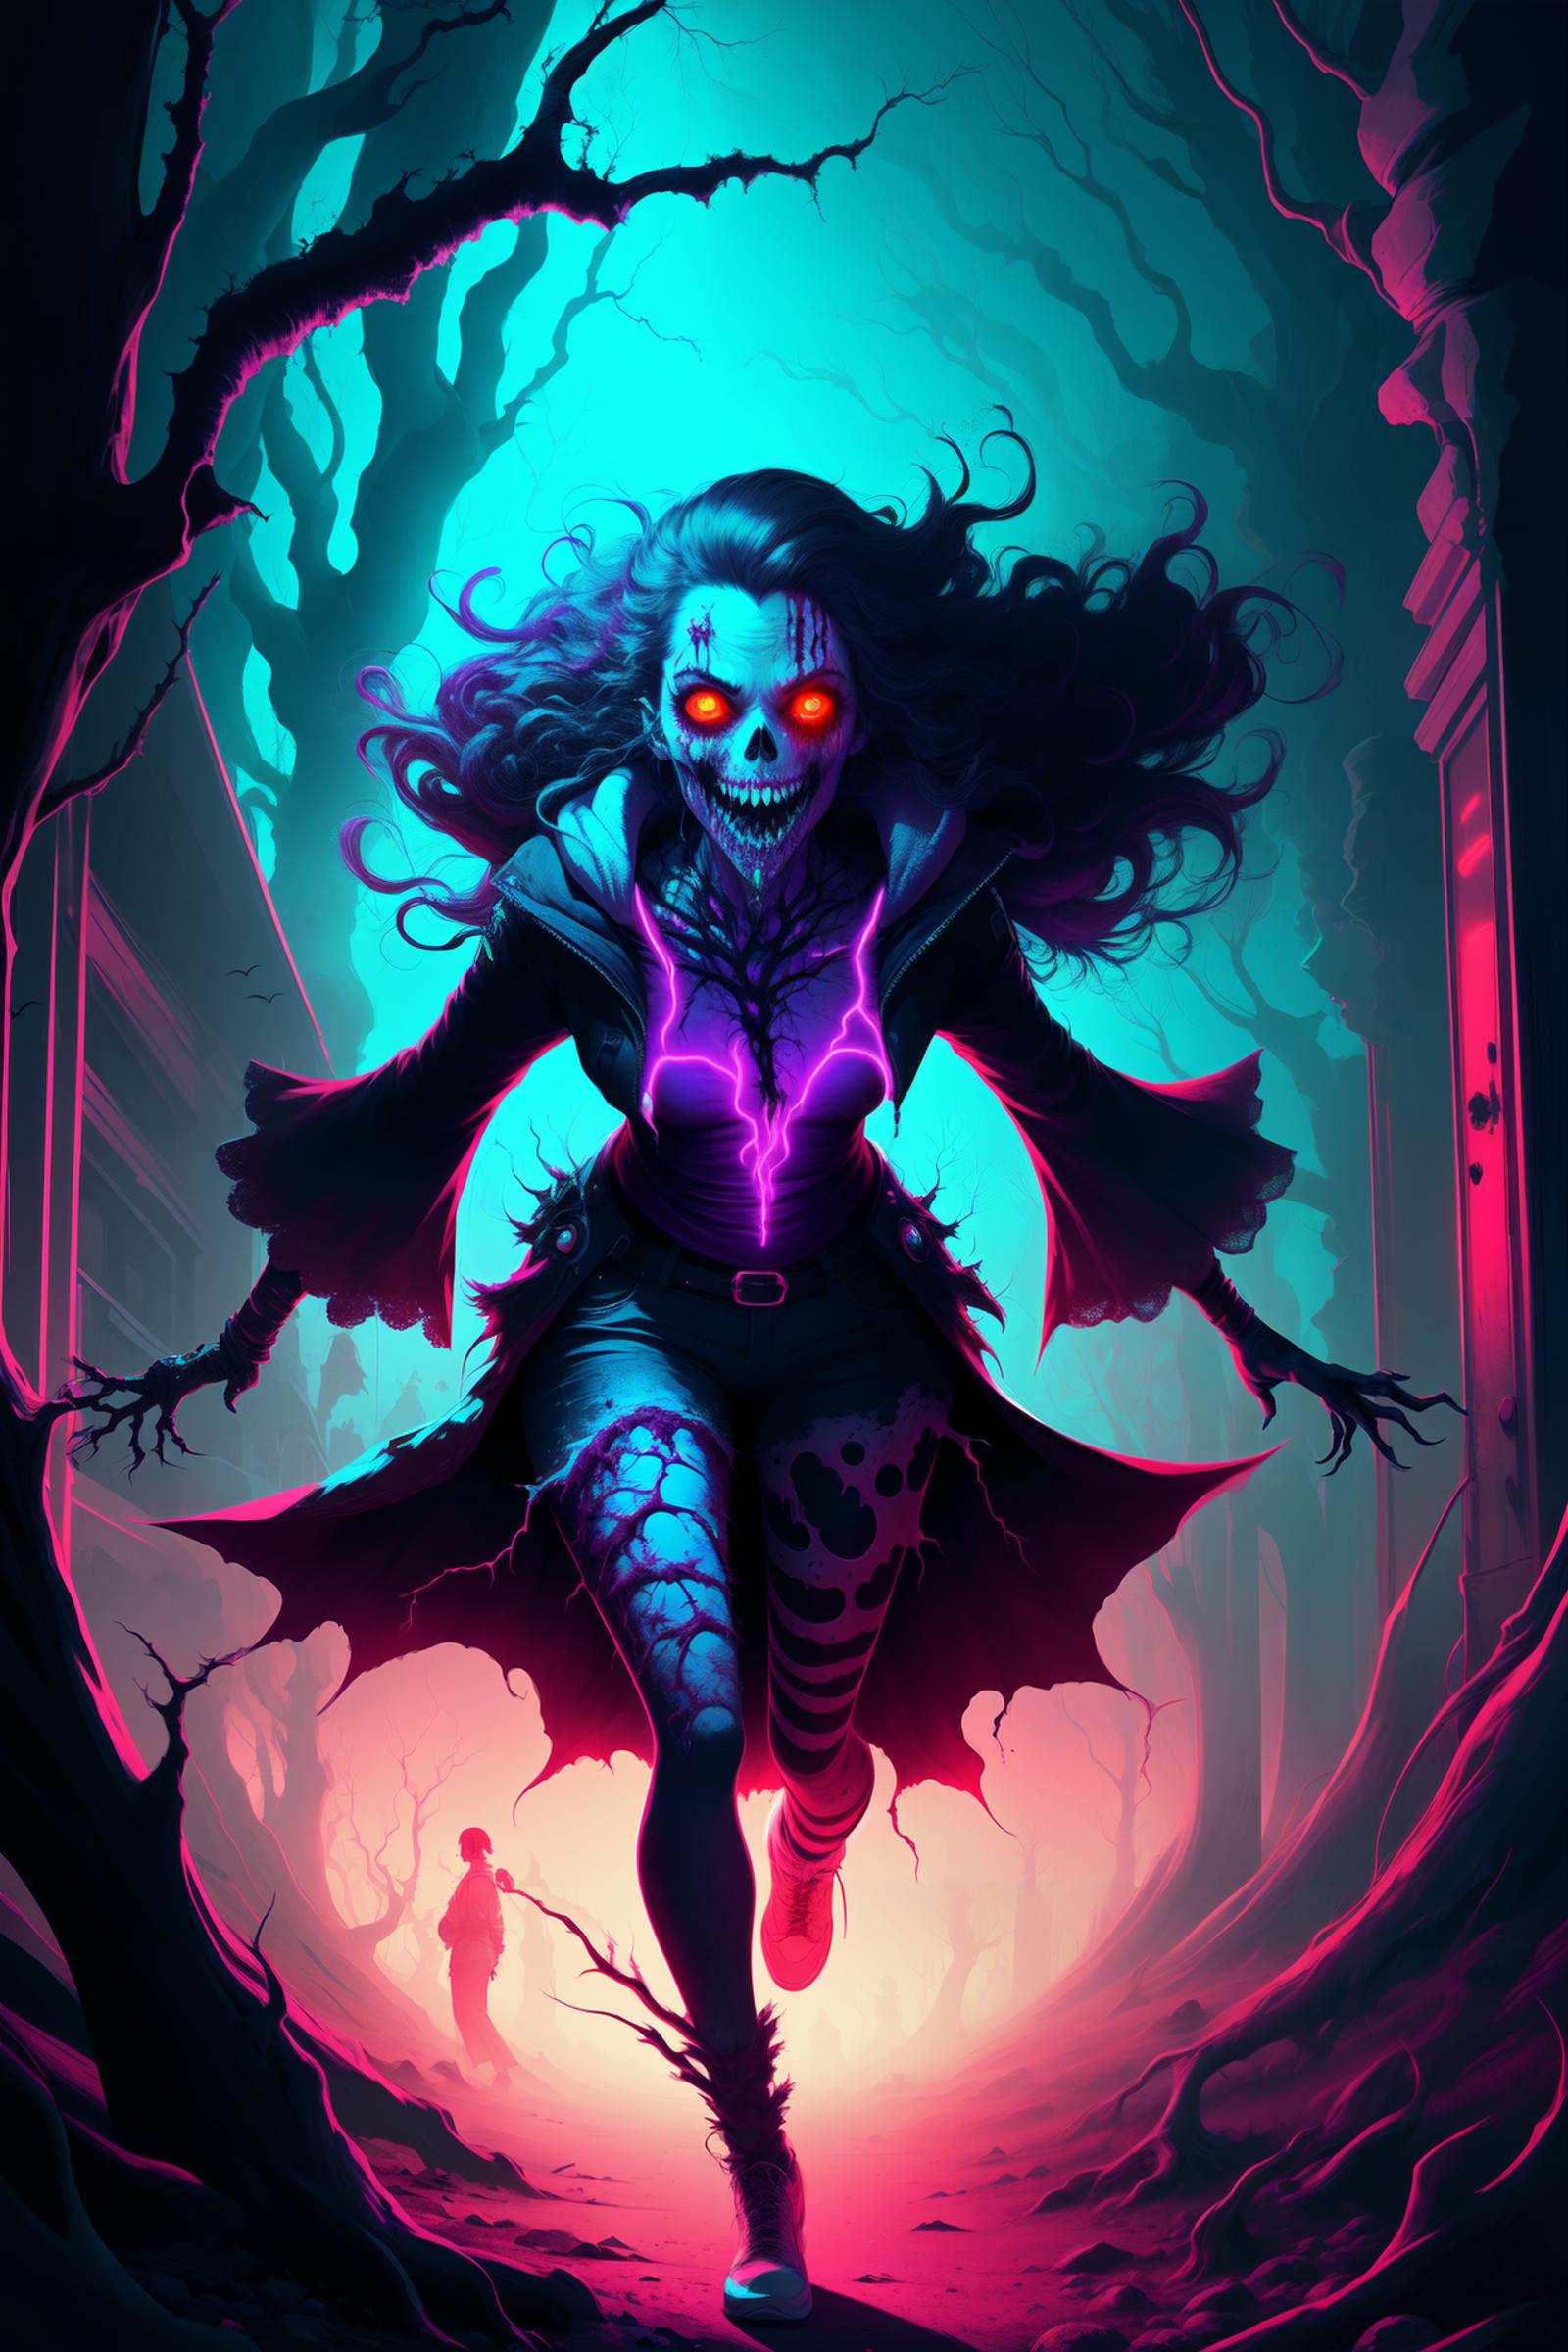 Colorful Horrors image by Clonephaze